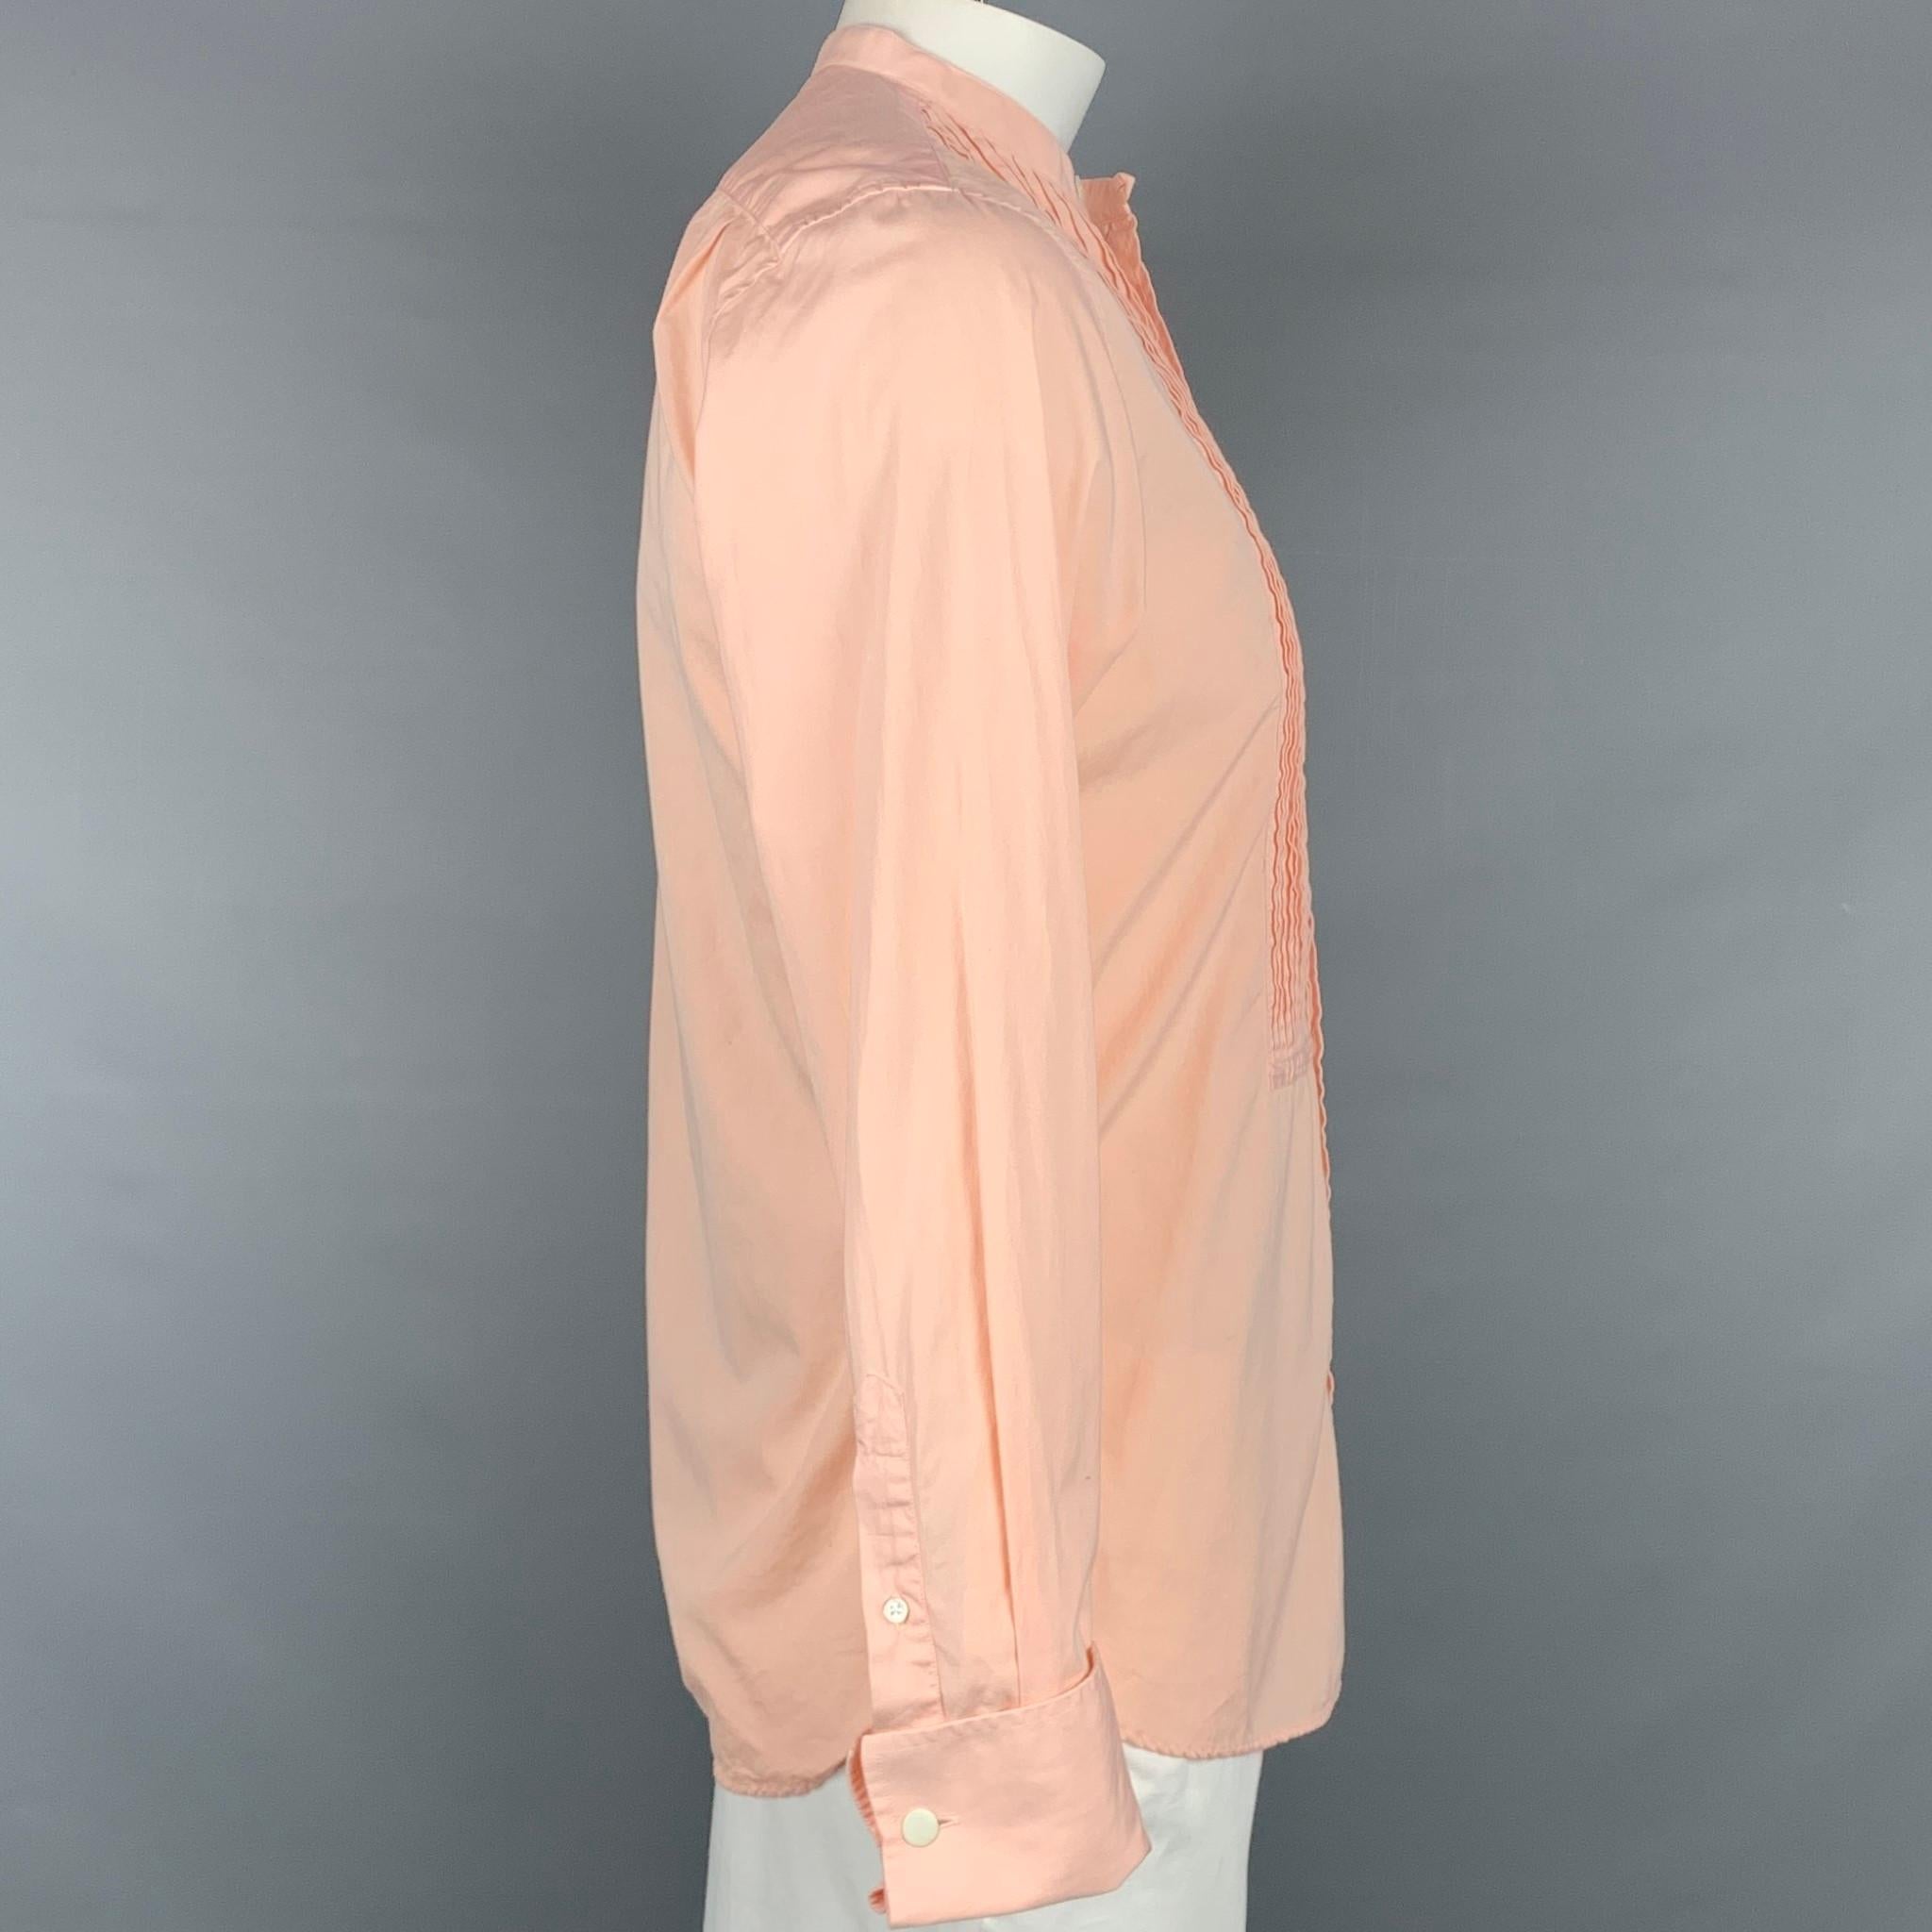 TODD SNYDER long sleeve shirt comes in a peach cotton featuring a nehru collar, pleated front, french cuffs, and a button up closure. Cufflinks not included. Made in Portugal.

Very Good Pre-Owned Condition.
Marked: M

Measurements:

Shoulder: 17.5